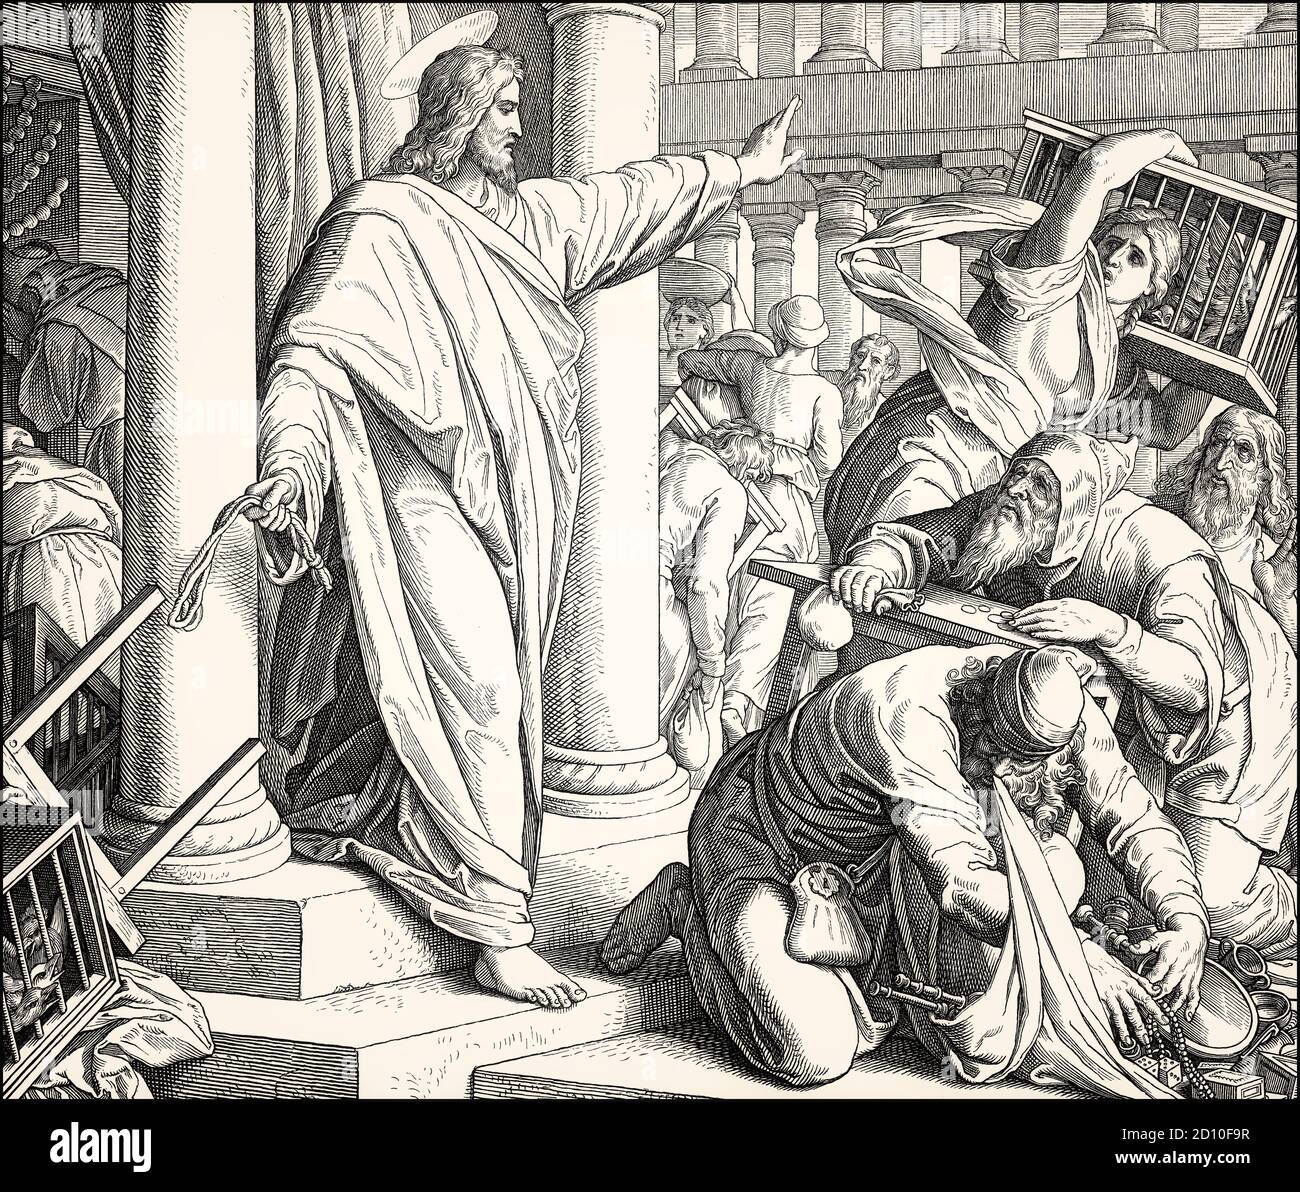 The cleansing of the Temple, New Testament, by Julius Schnorr von Carolsfeld, 1860 Stock Photo